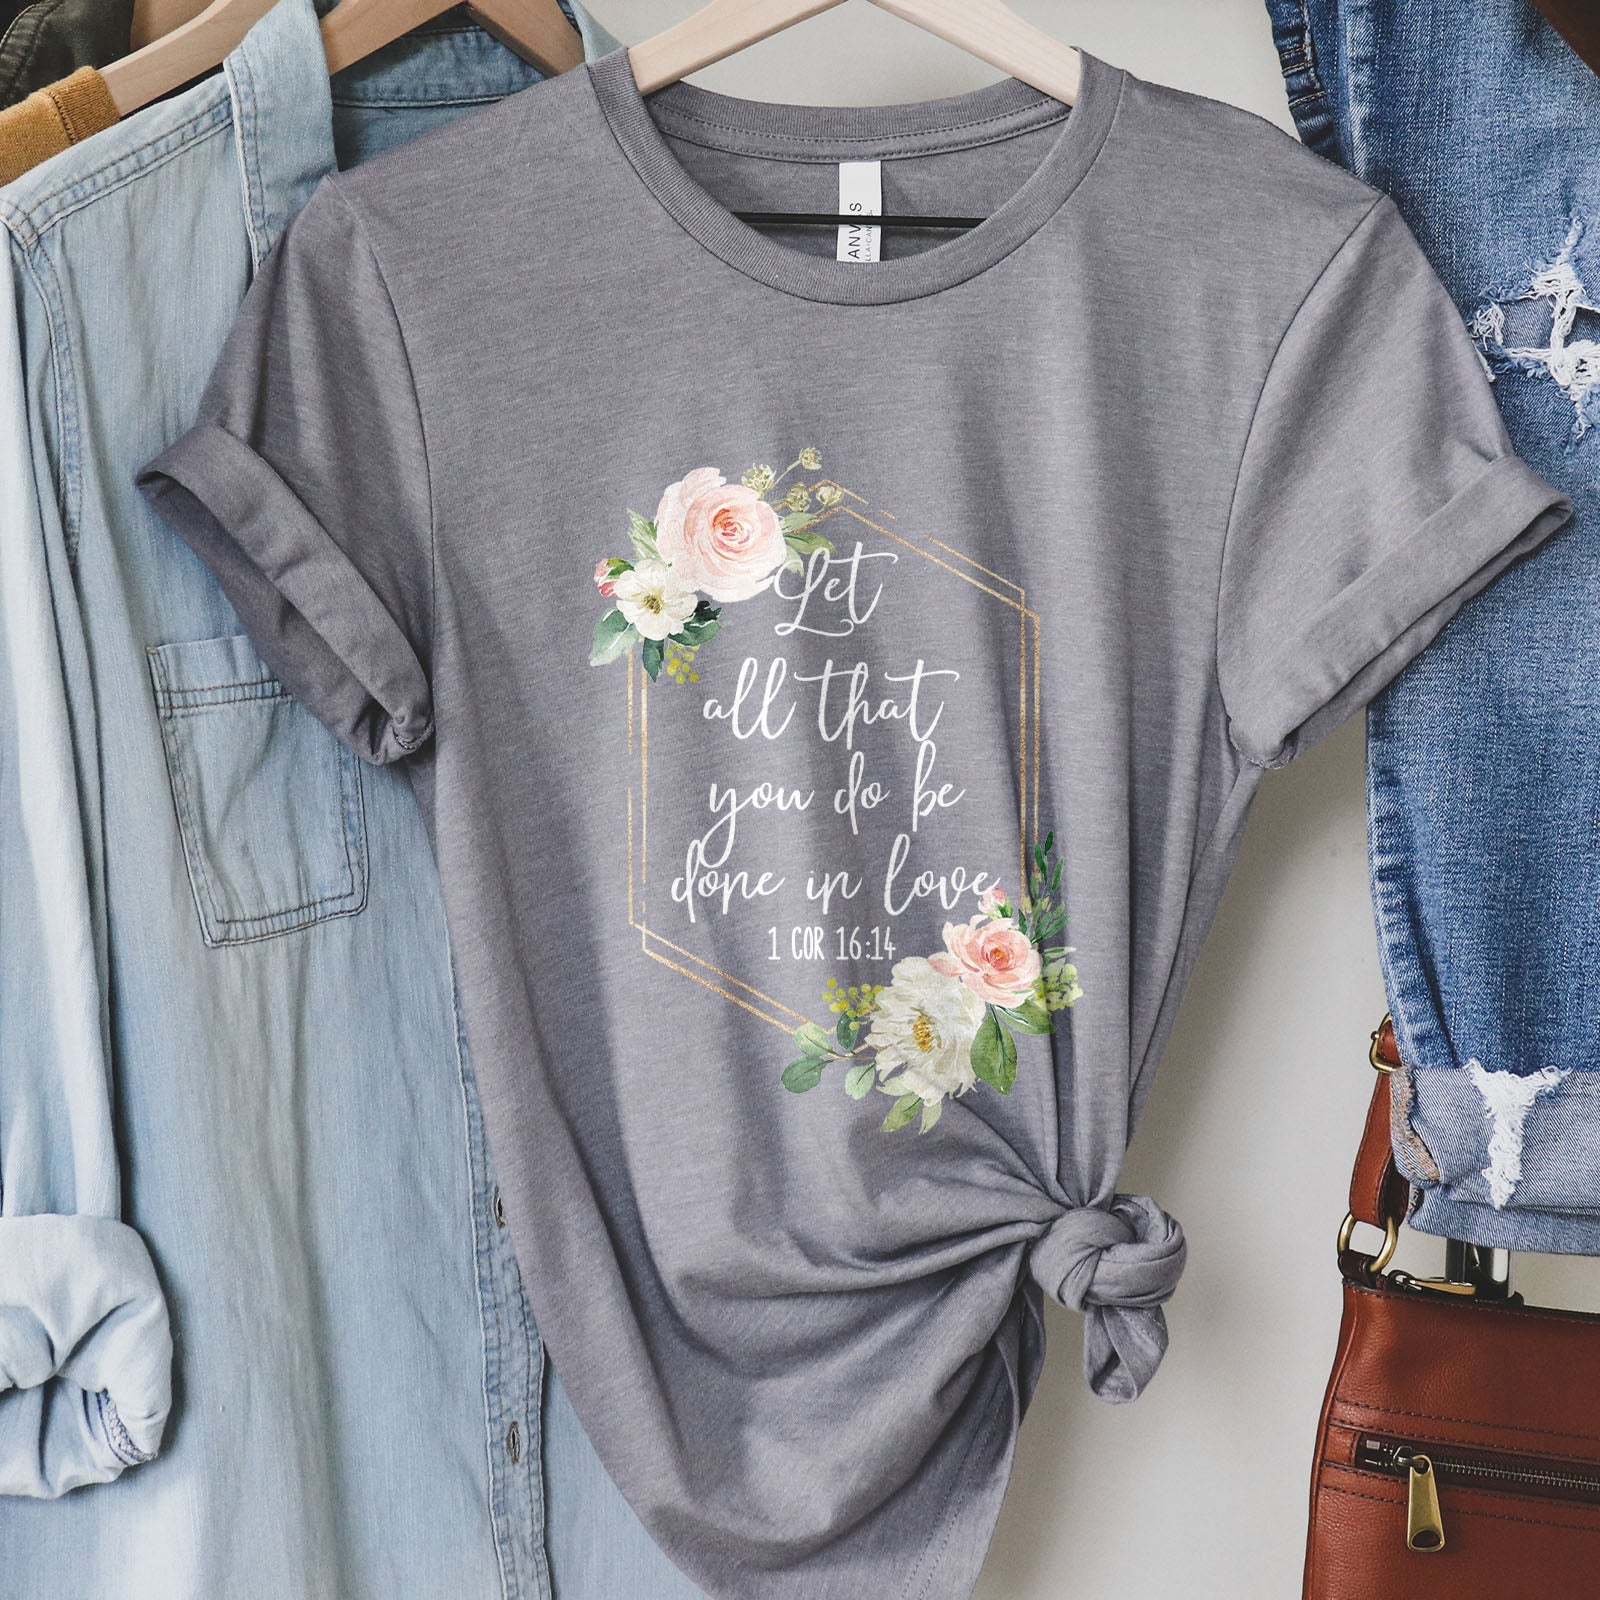 Let All That You Do Be Done With Love 1 Corinthians 16:14 Floral Glitter Tee Shirts For Women - Christian Shirts for Women 